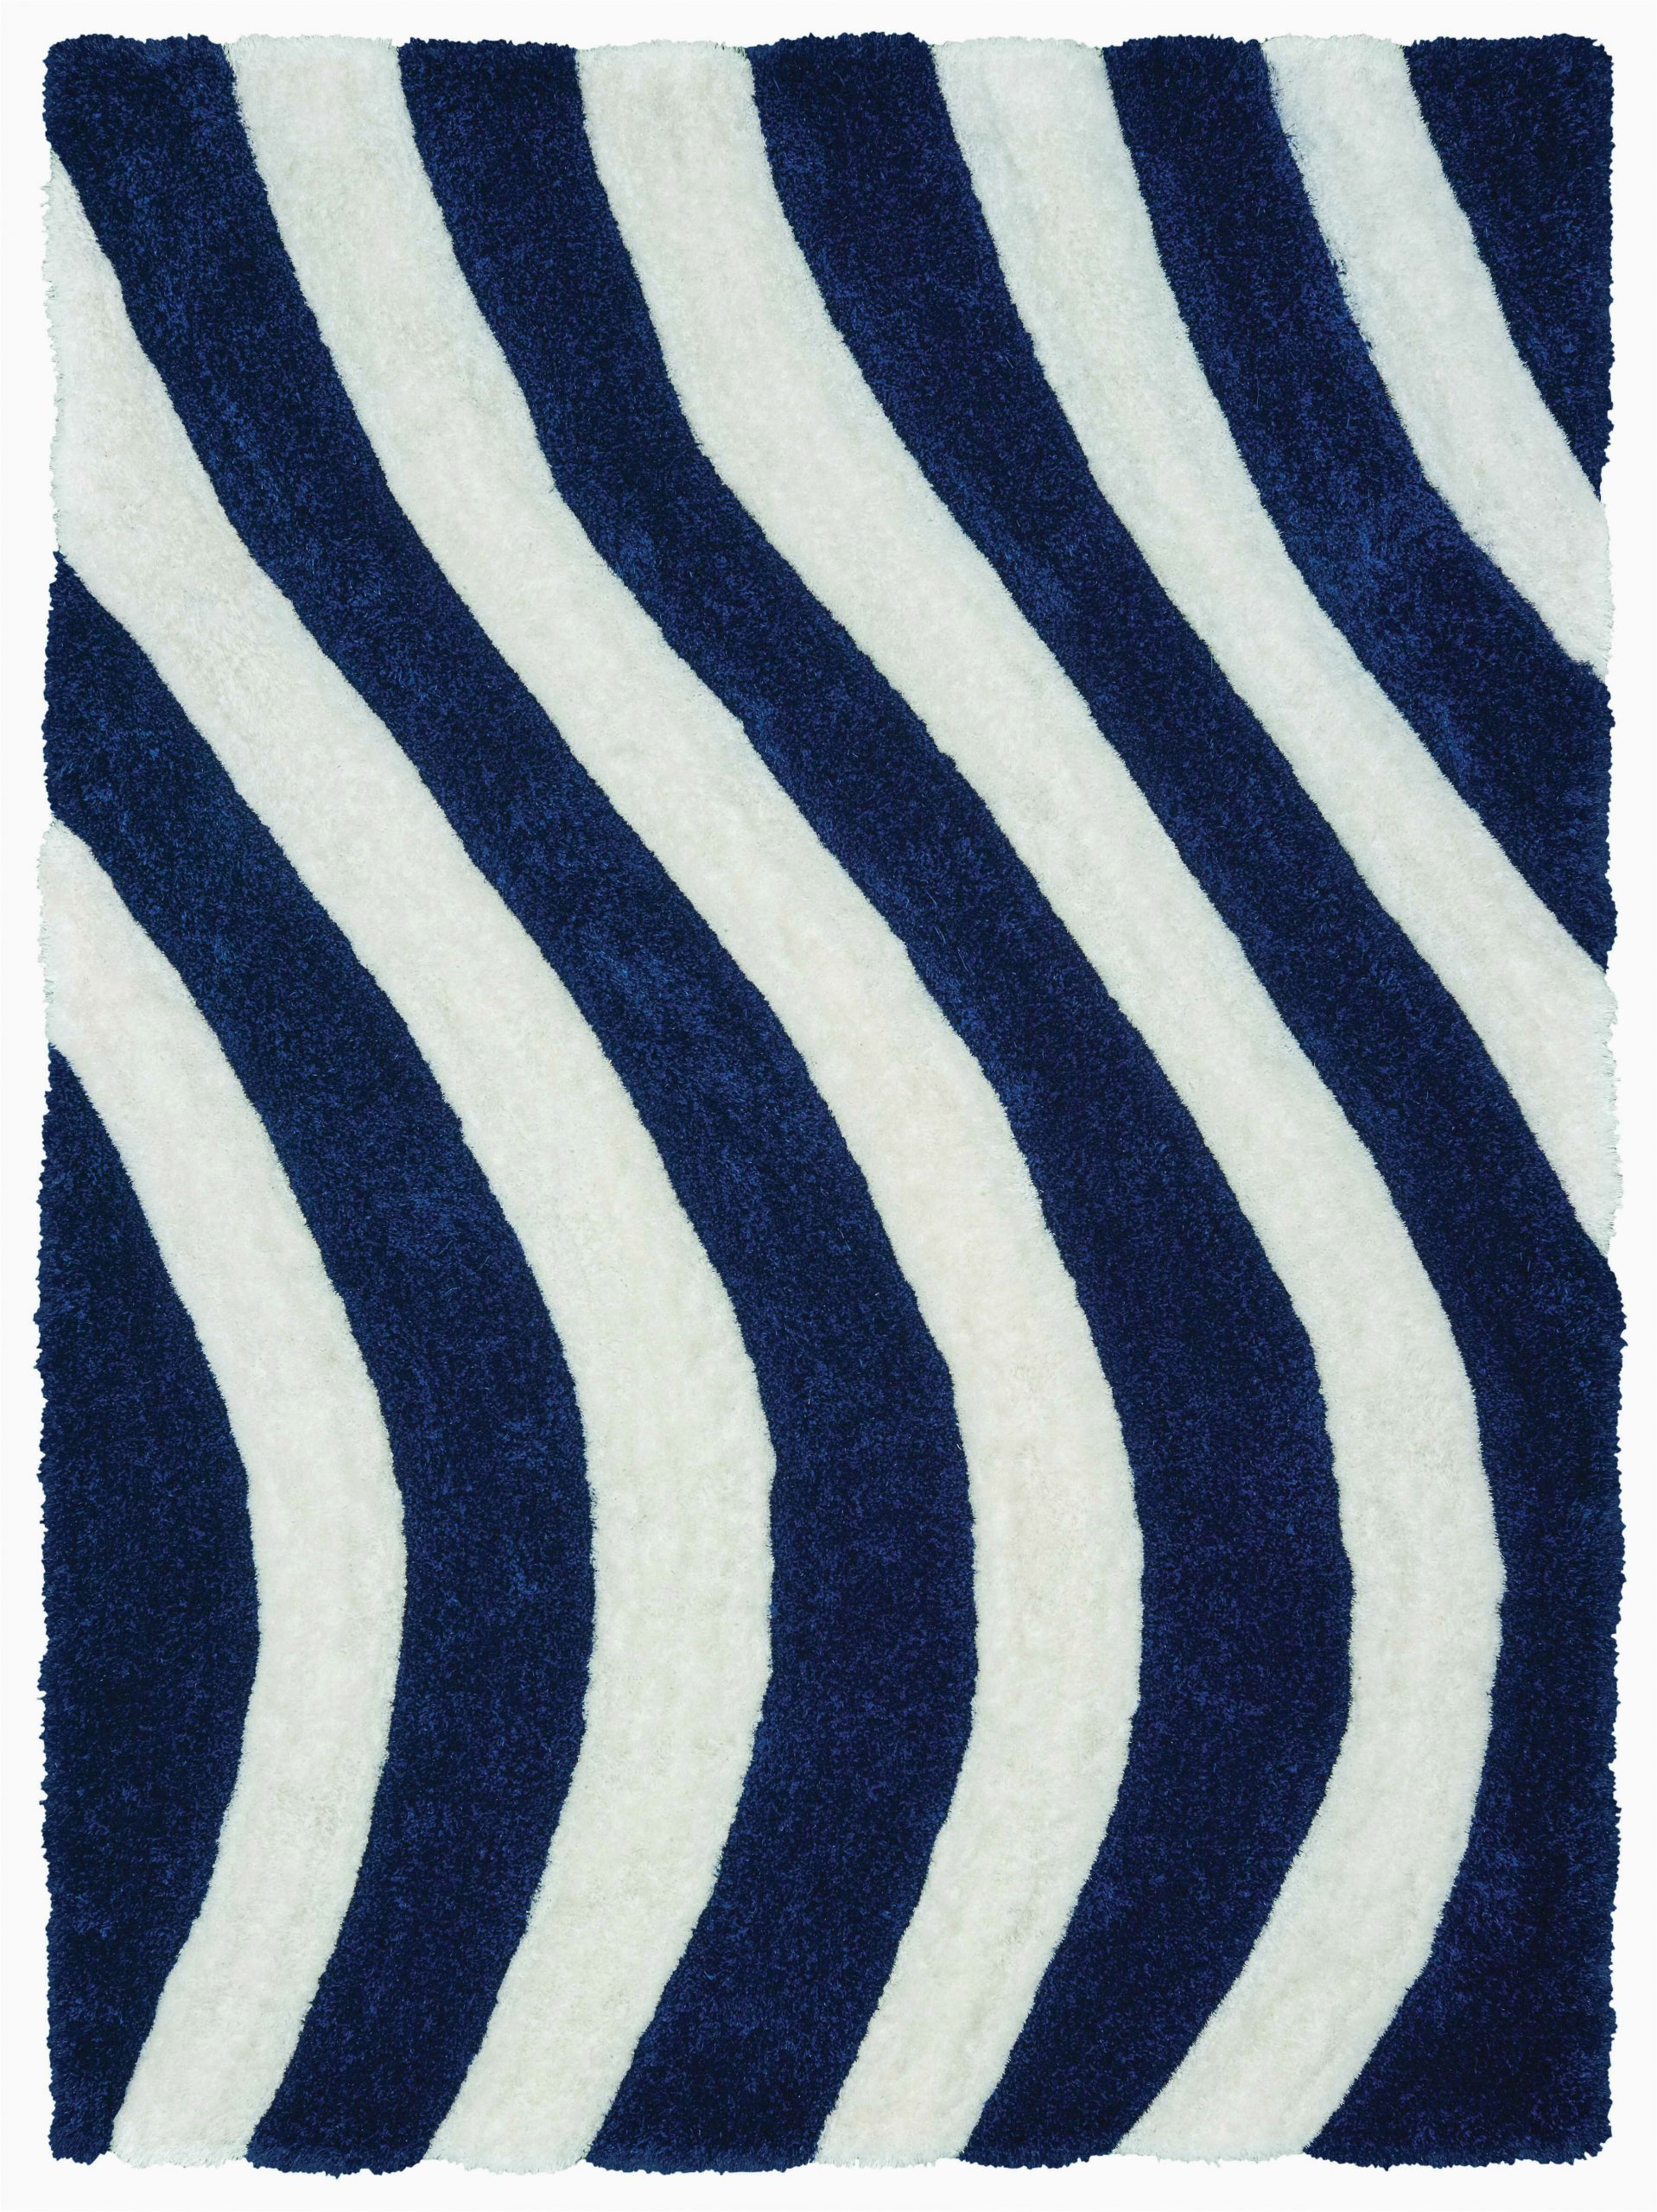 Wayfair Rugs Blue and White Rothsville Navy Blue White Rug